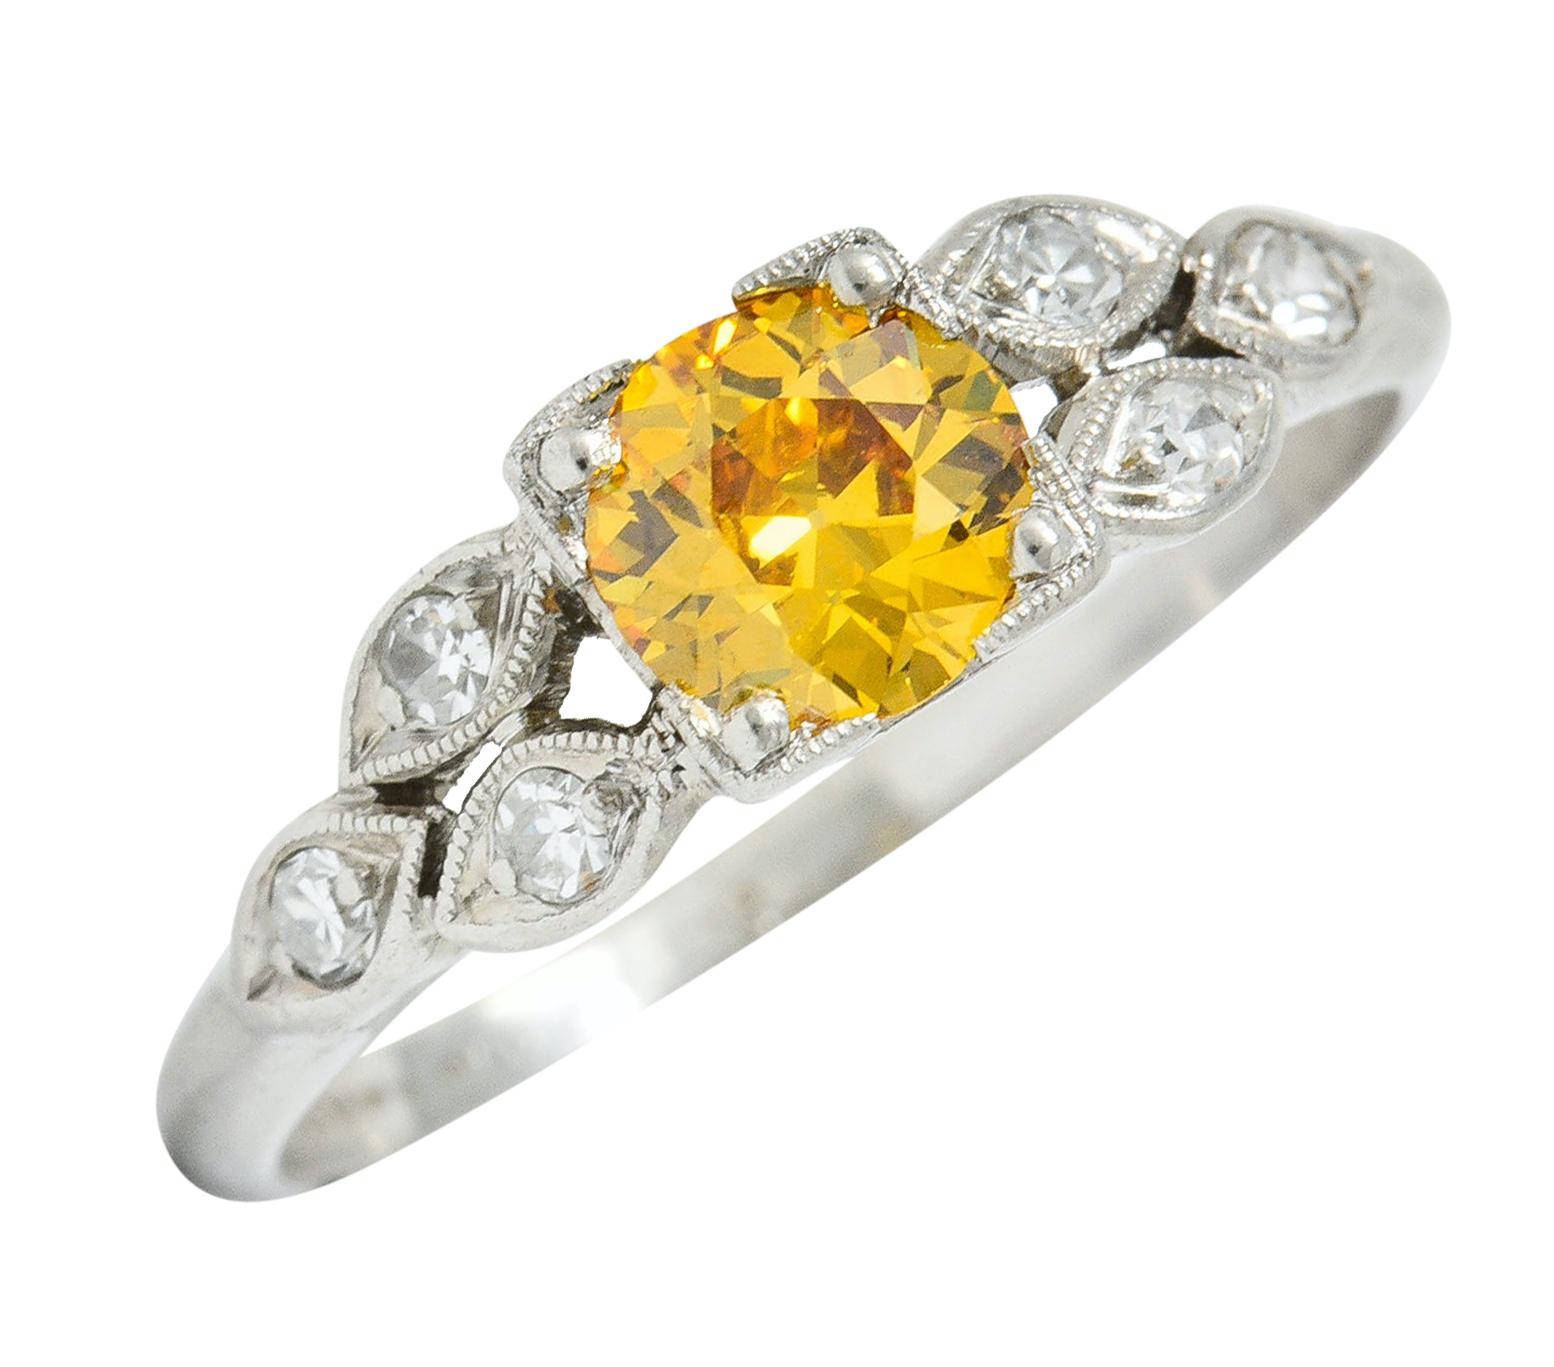 Retro mounting centers an old European cut fancy colored diamond weighing 0.47 carat

With natural fancy intense orange-yellow color and VS clarity

Set in a square form head and flanked by navette form shoulders

Accented by single cut diamonds